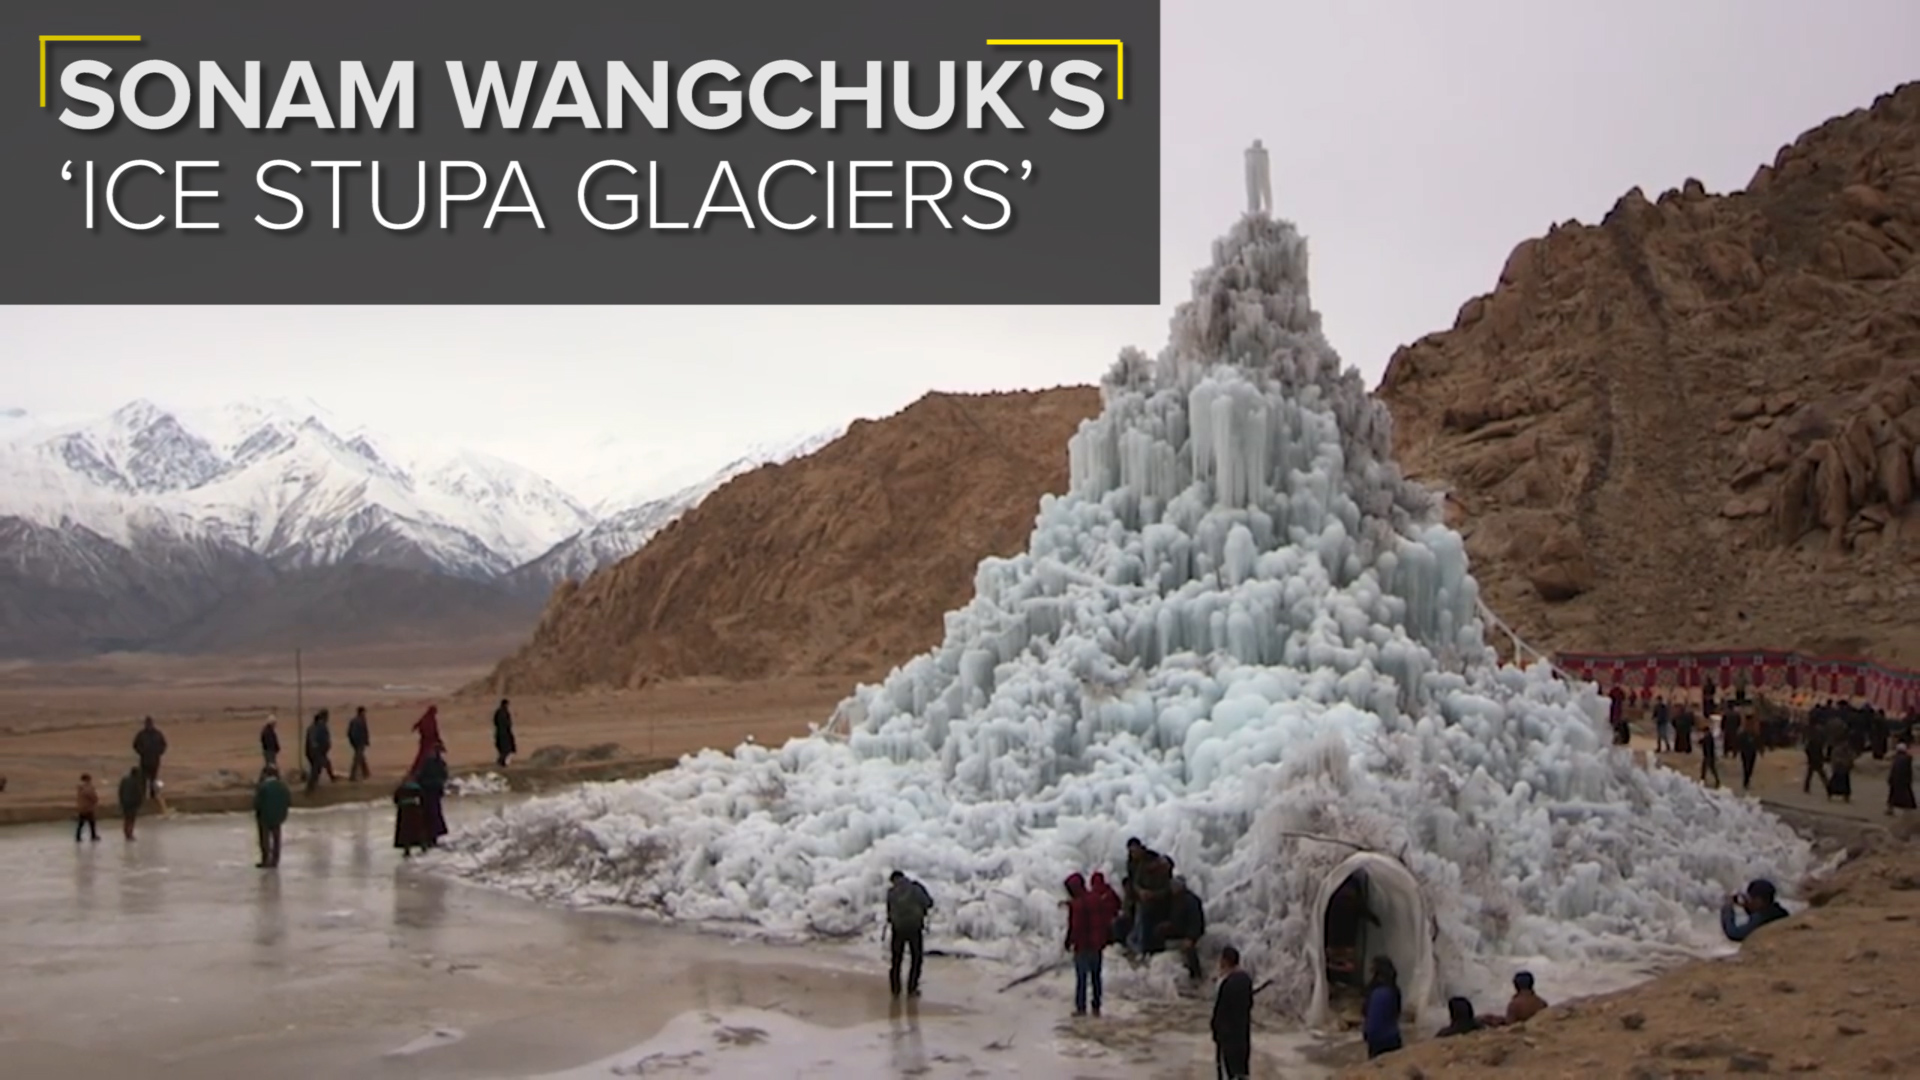 VIDEO: These ‘Ice Stupa Glaciers’ Are a Solution to Water Crises in Ladakh